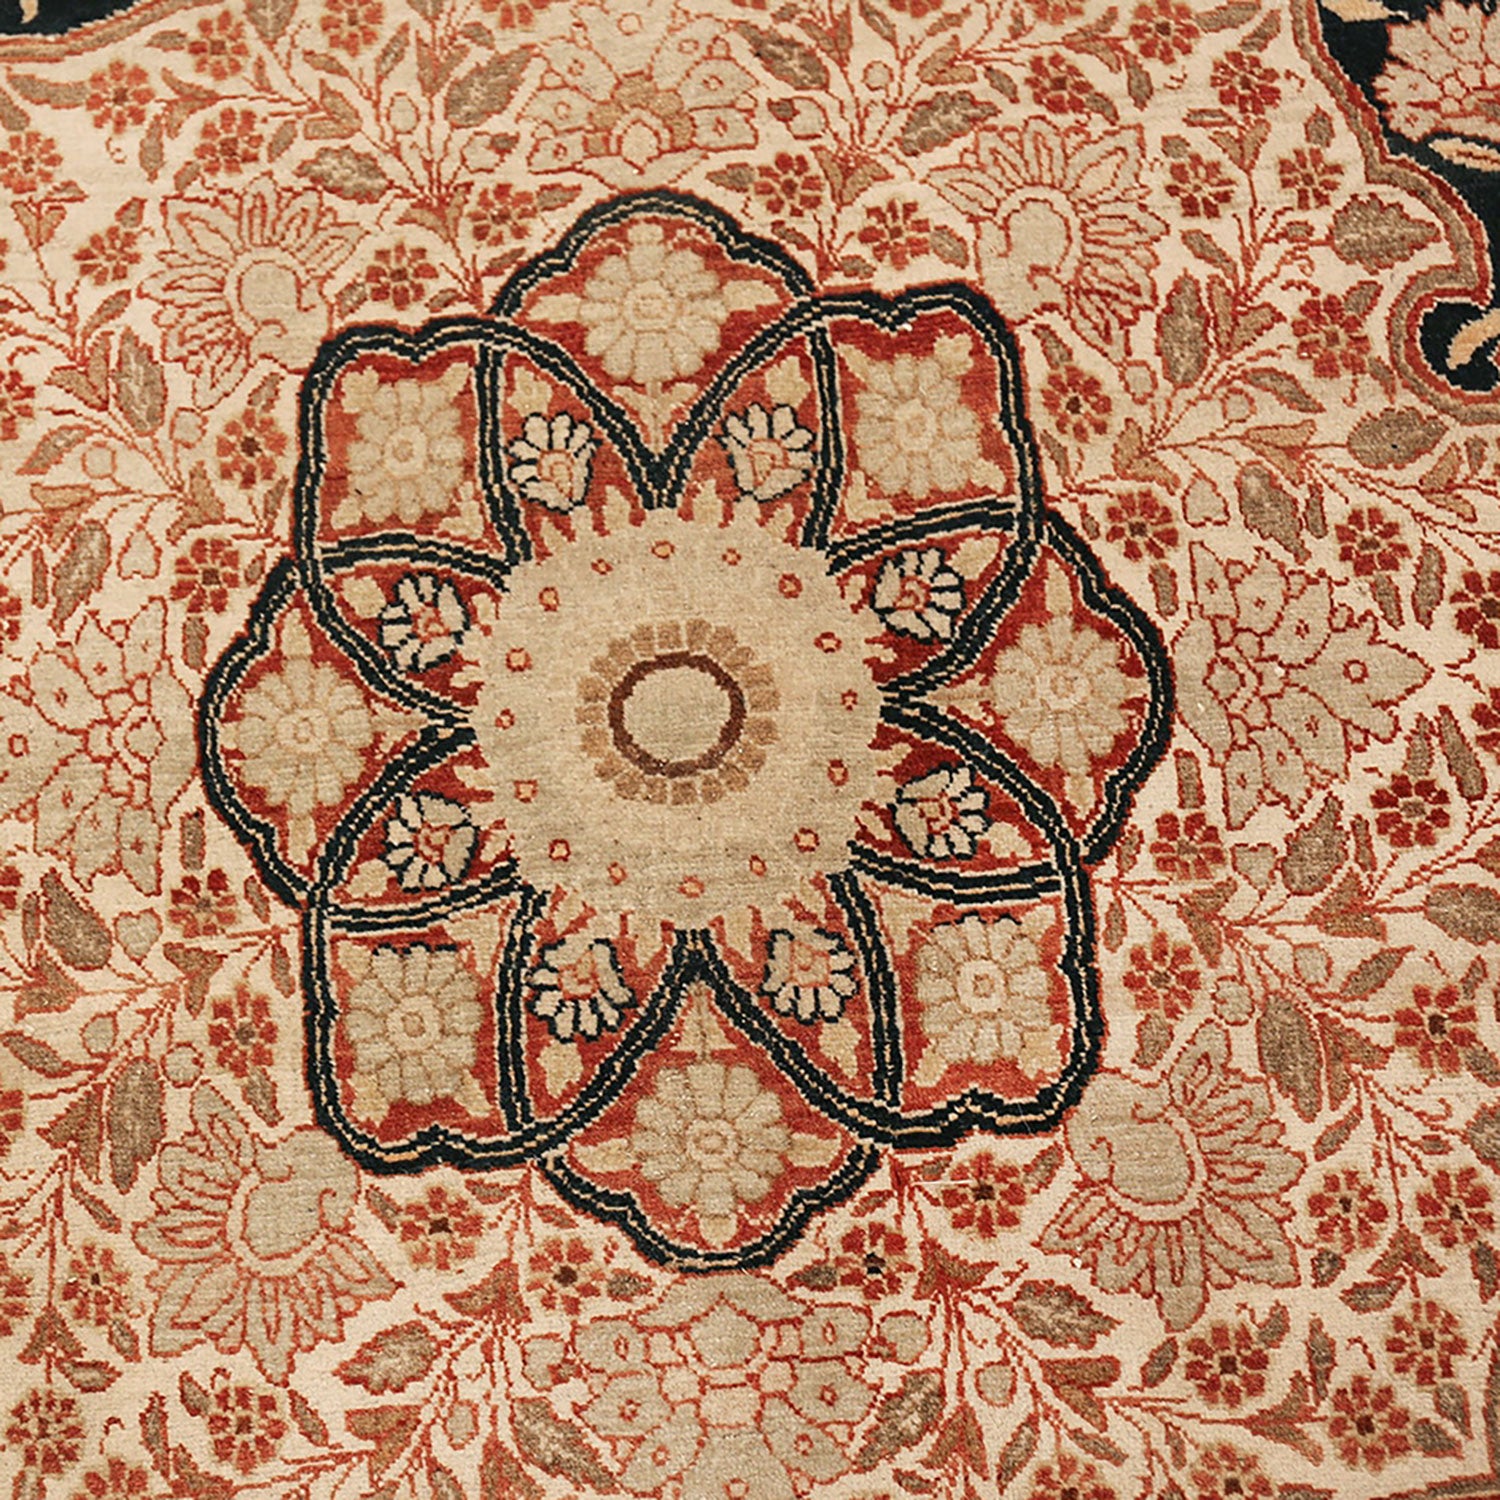 Intricately woven Persian-style carpet with rich floral patterns and symmetrical design.